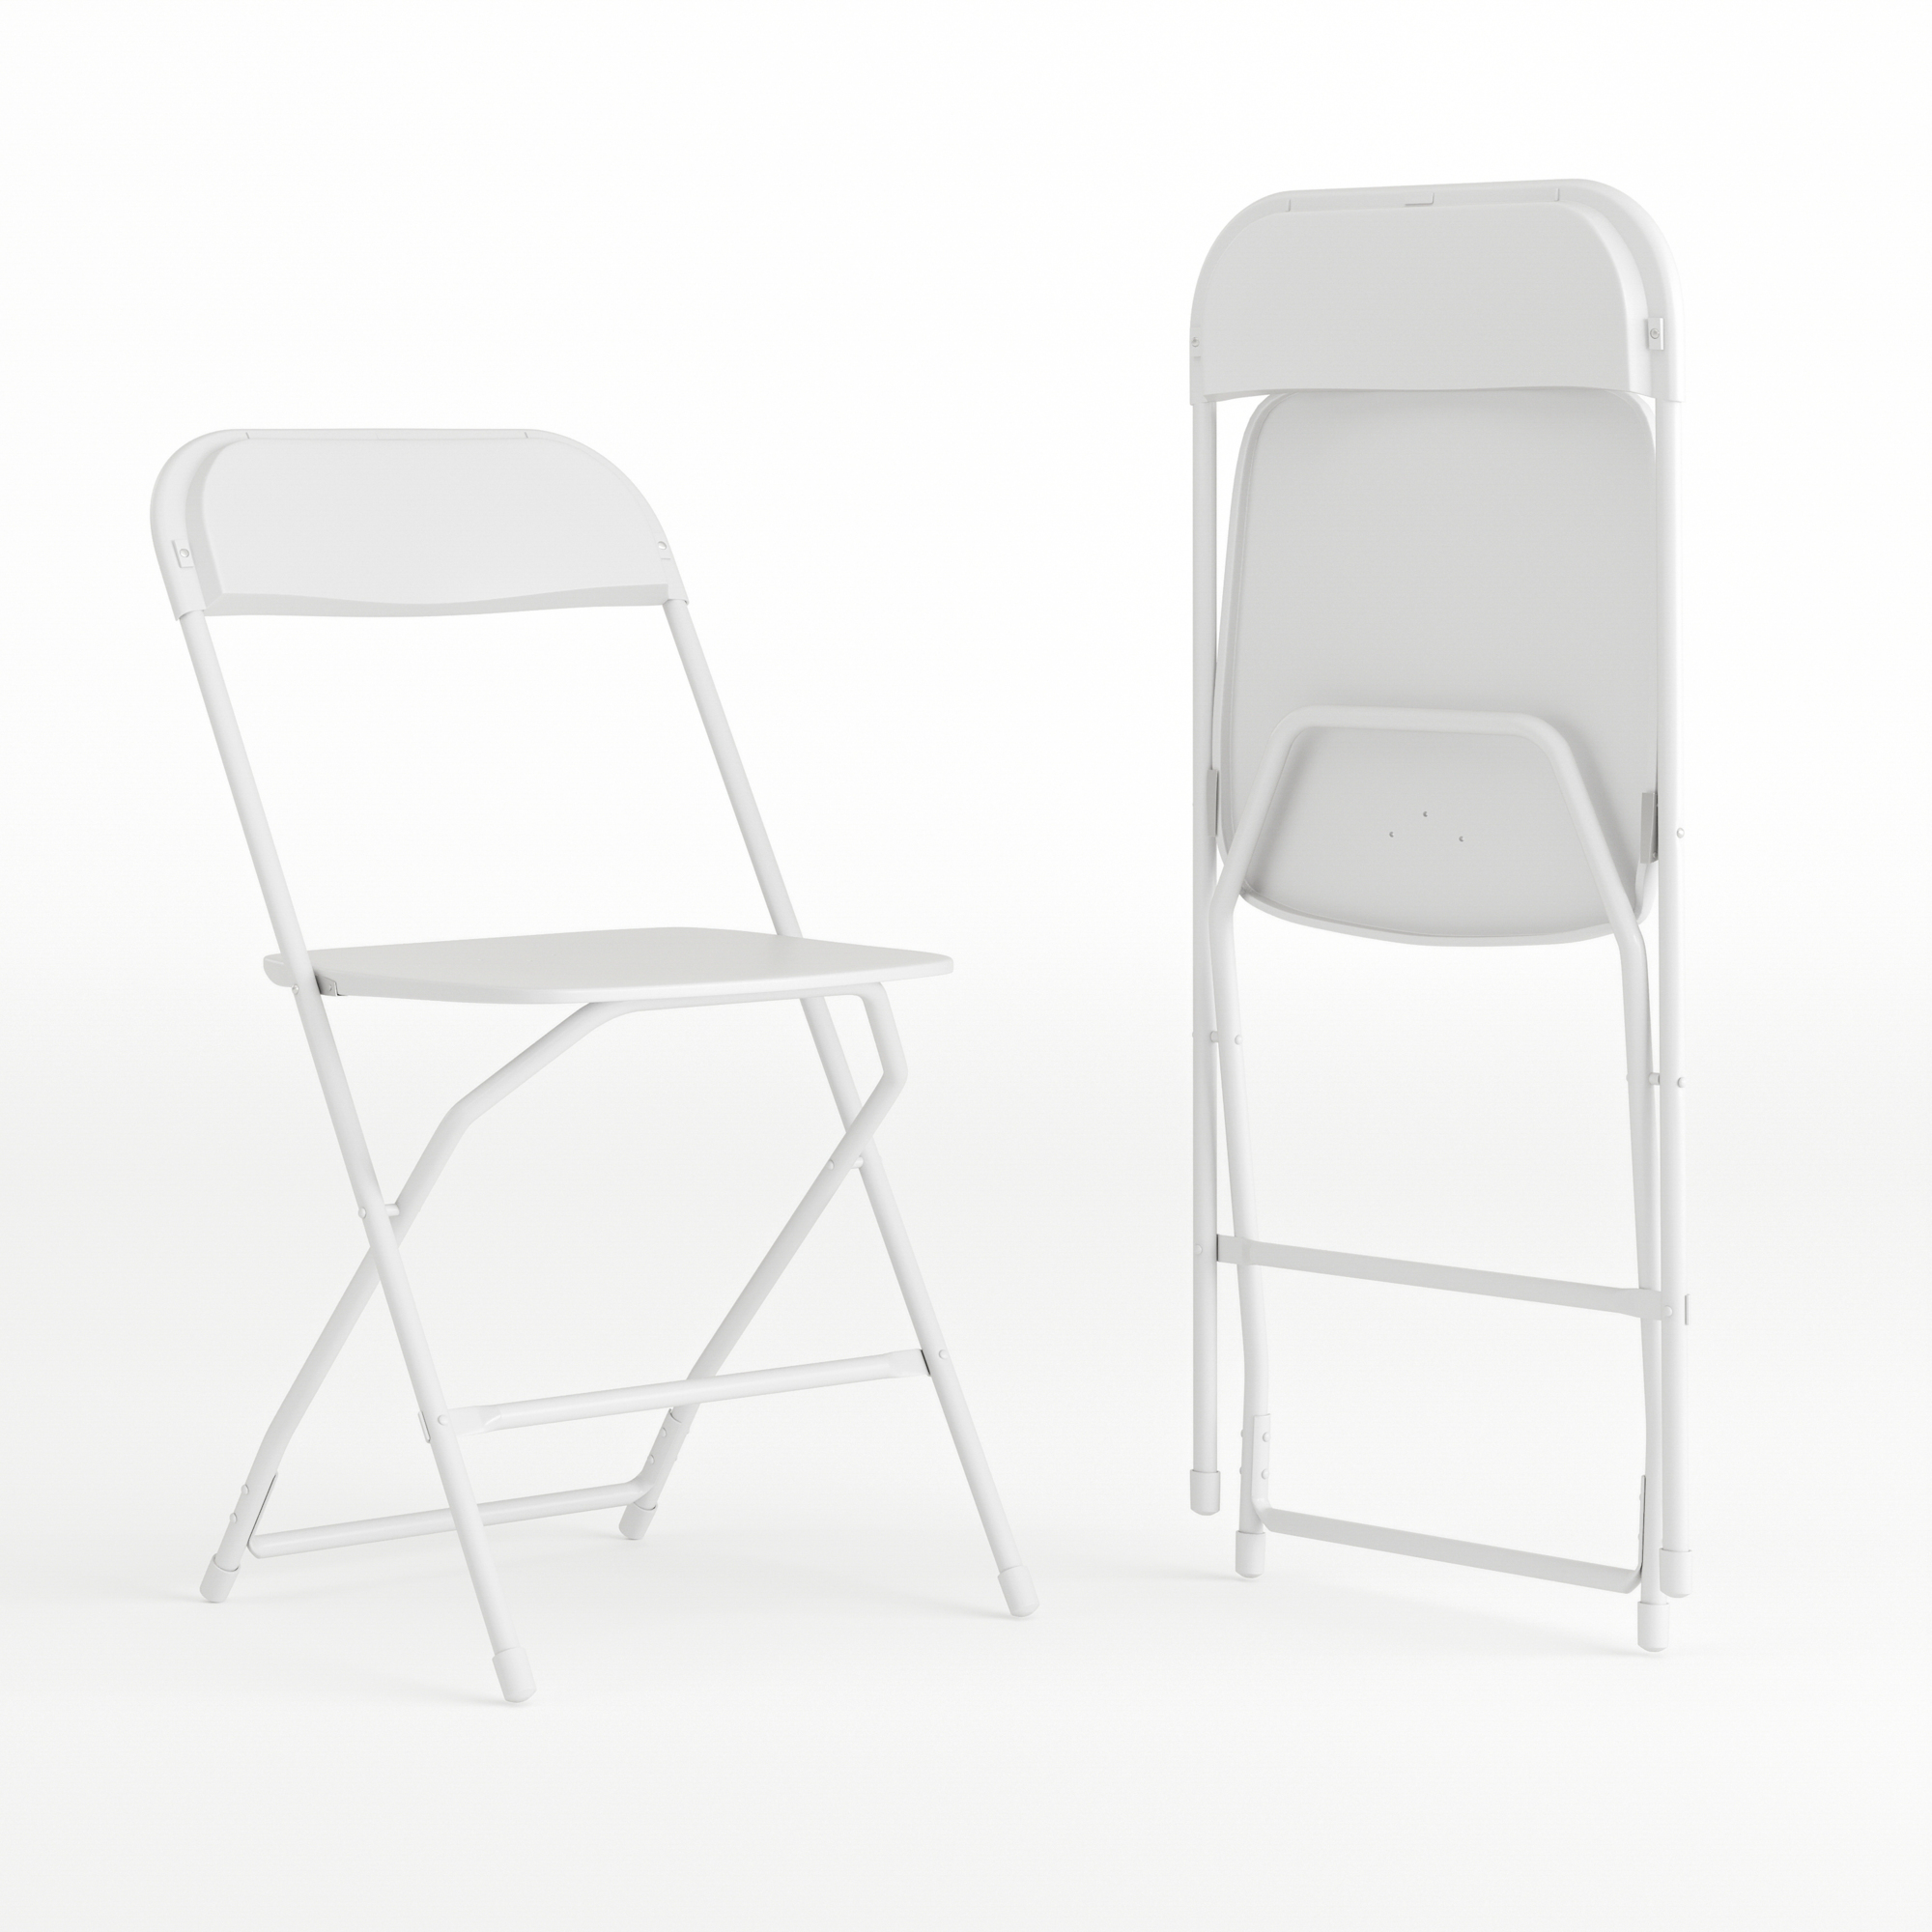 Flash Furniture, Folding Chair - White Plastic - 2 Pack, Primary Color White, Included (qty.) 2, Model 2LEL3WHITE